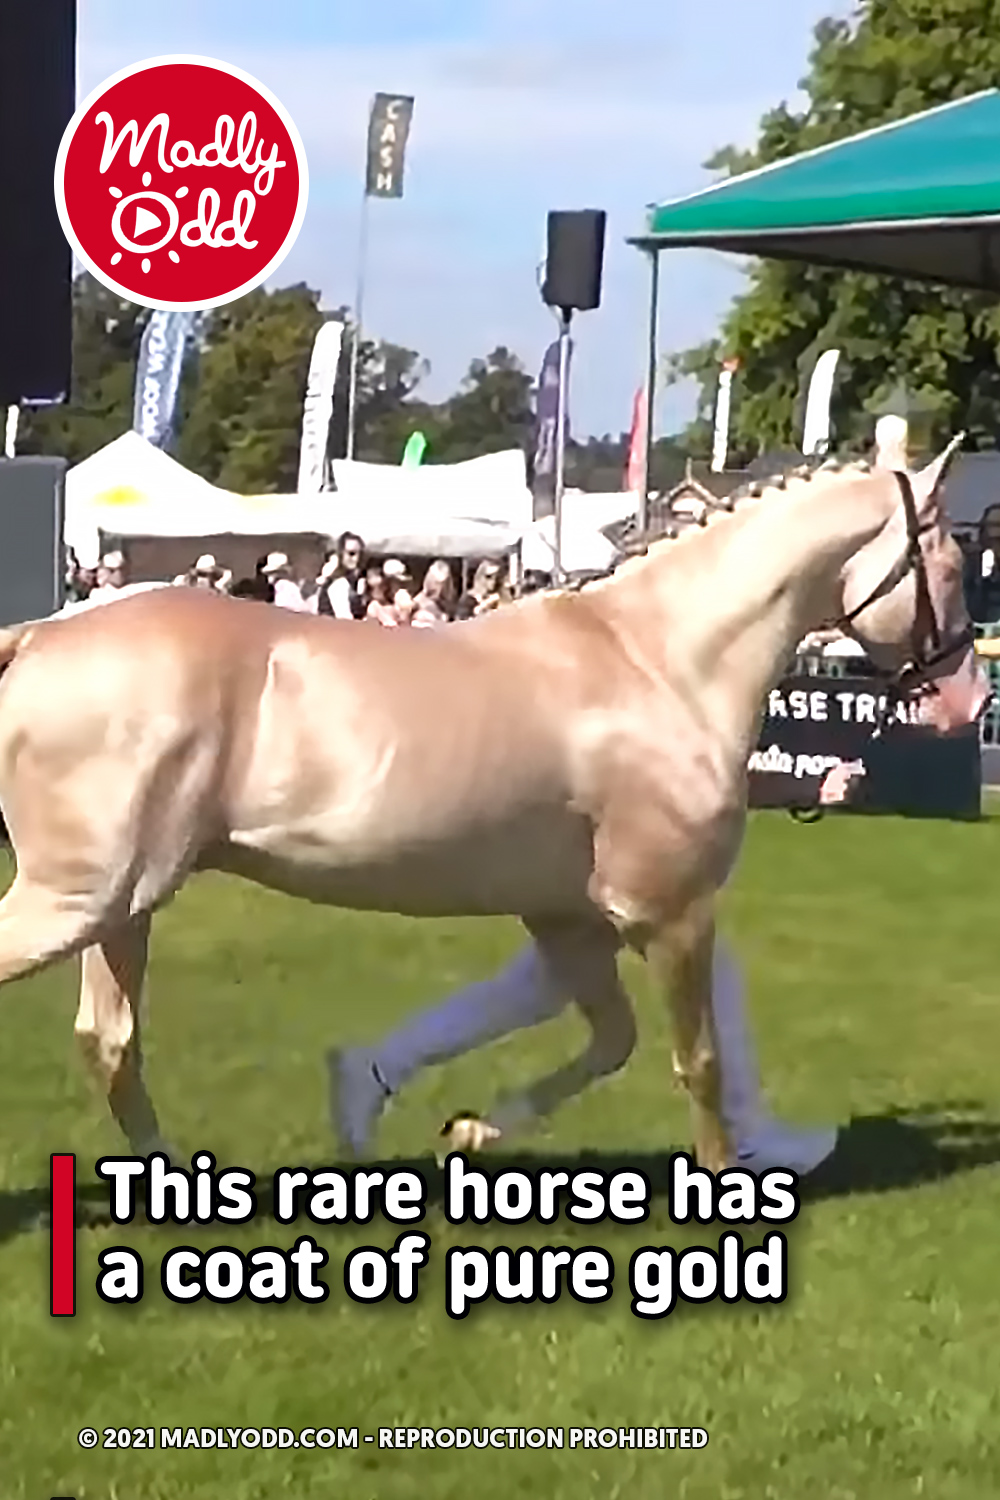 This rare horse has a coat of pure gold